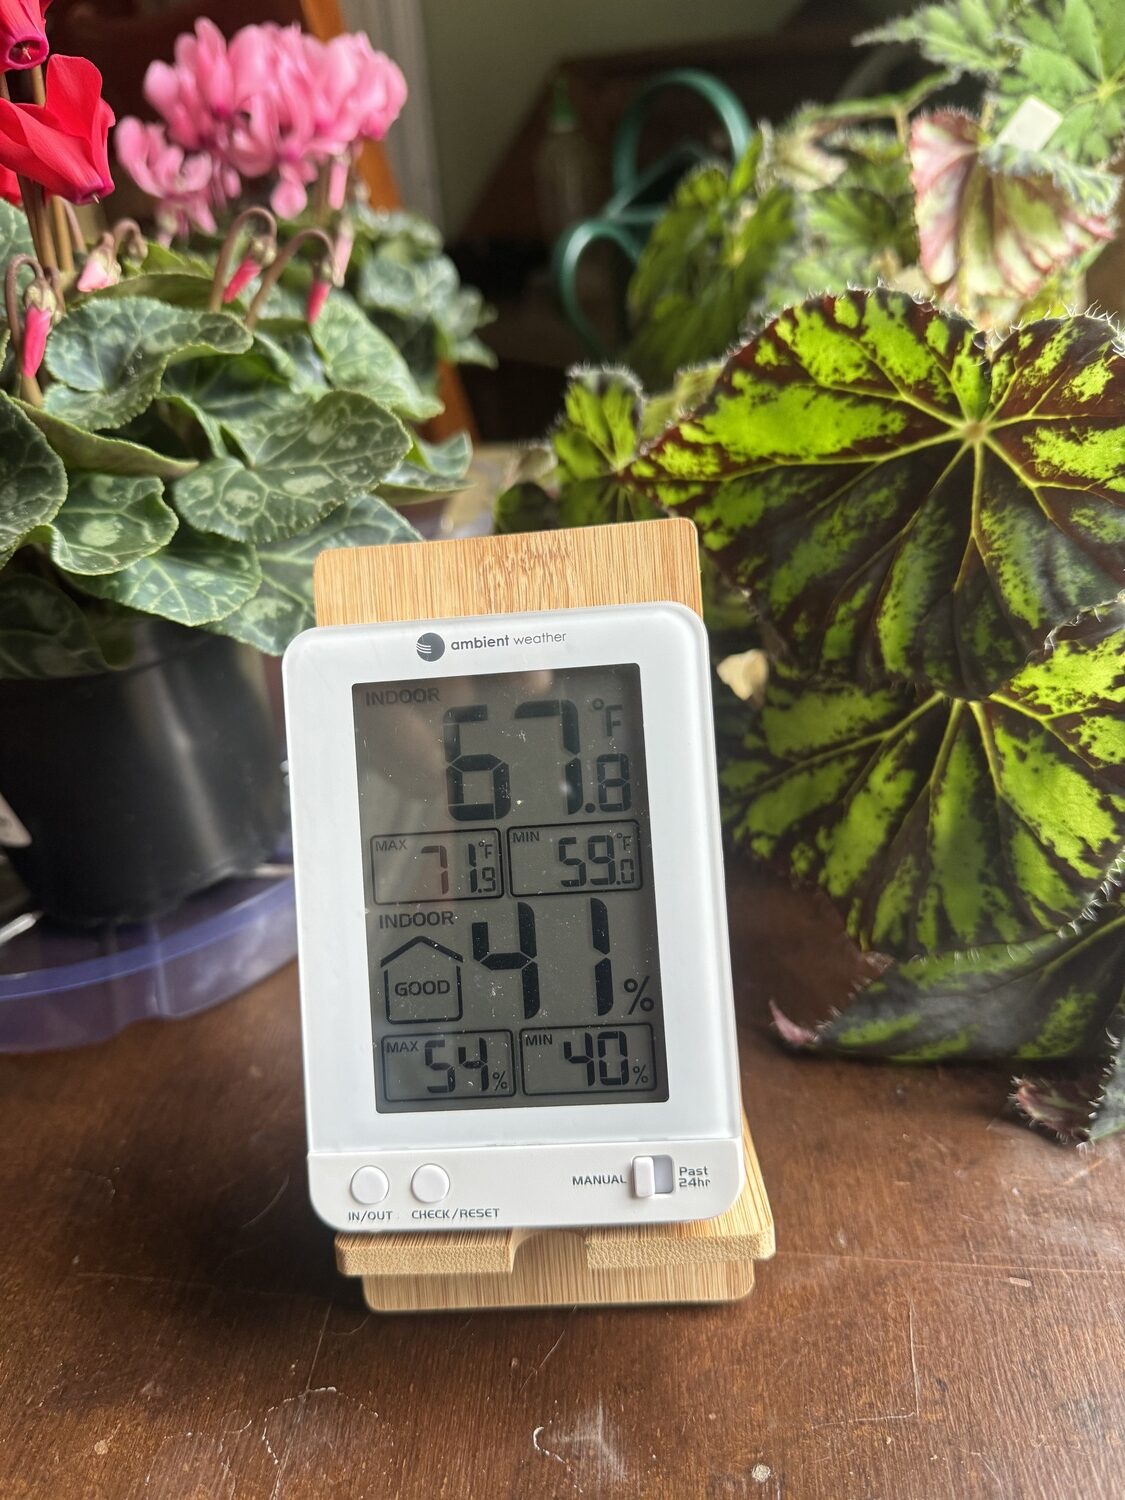 A simple and small hygro/thermometer is essential in know the humidty and moisture in the air around your houseplants.  This model retains highs and lows of each until it’s reset. A great stocking stuffer, and they run around $20.
ANDREW MESSINGER